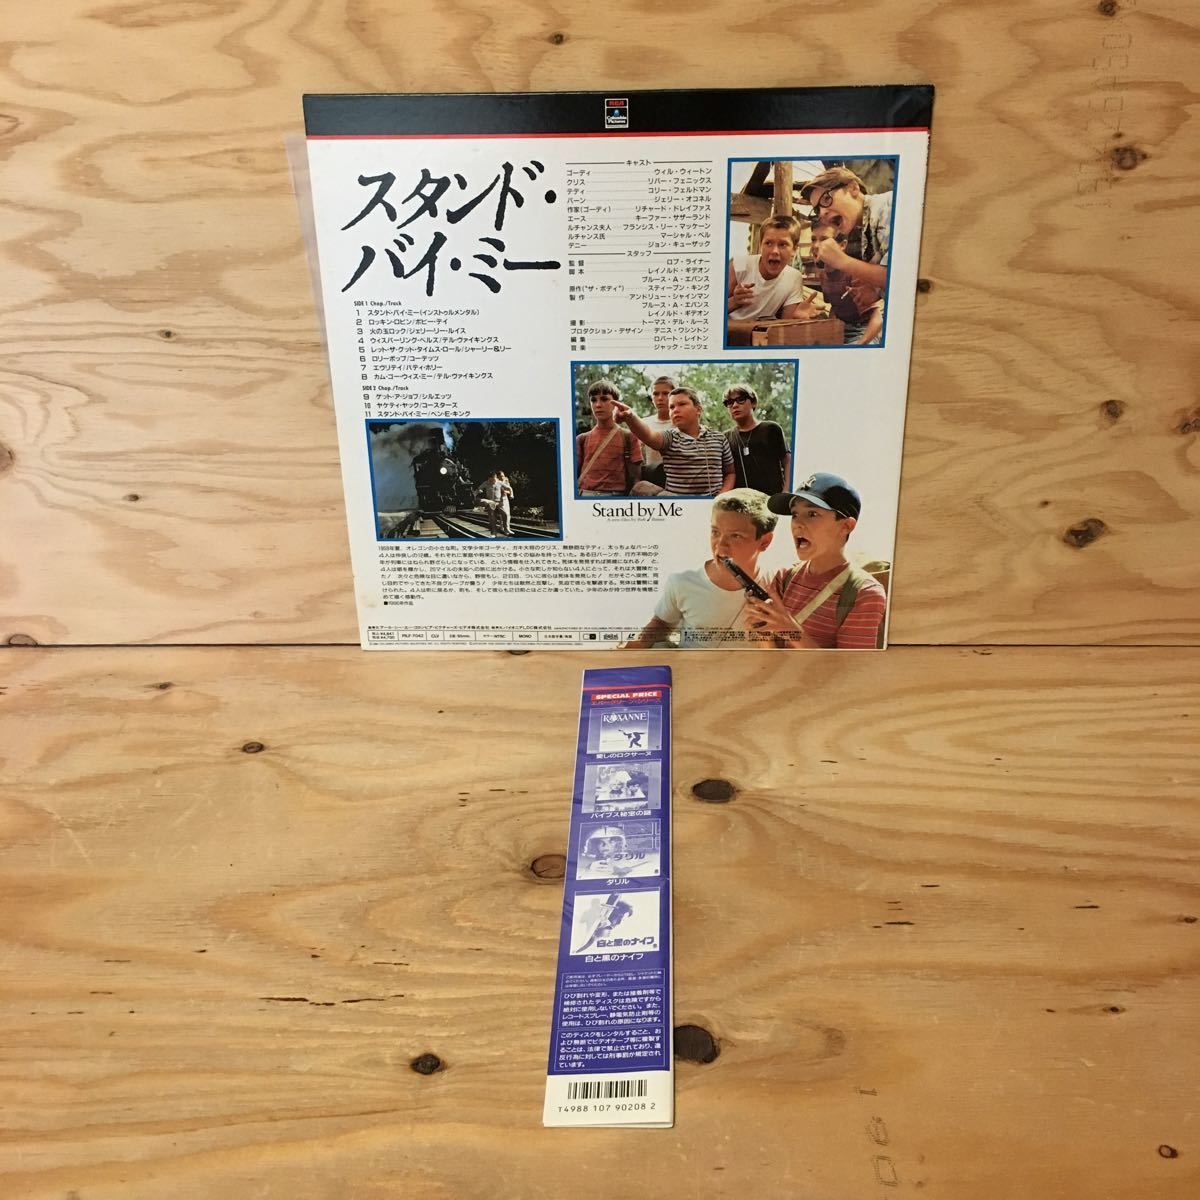 *Y3FIIB-200226 rare [ stand *bai*mi-Stand by Me]LD laser disk Will * we ton Lobb * liner 